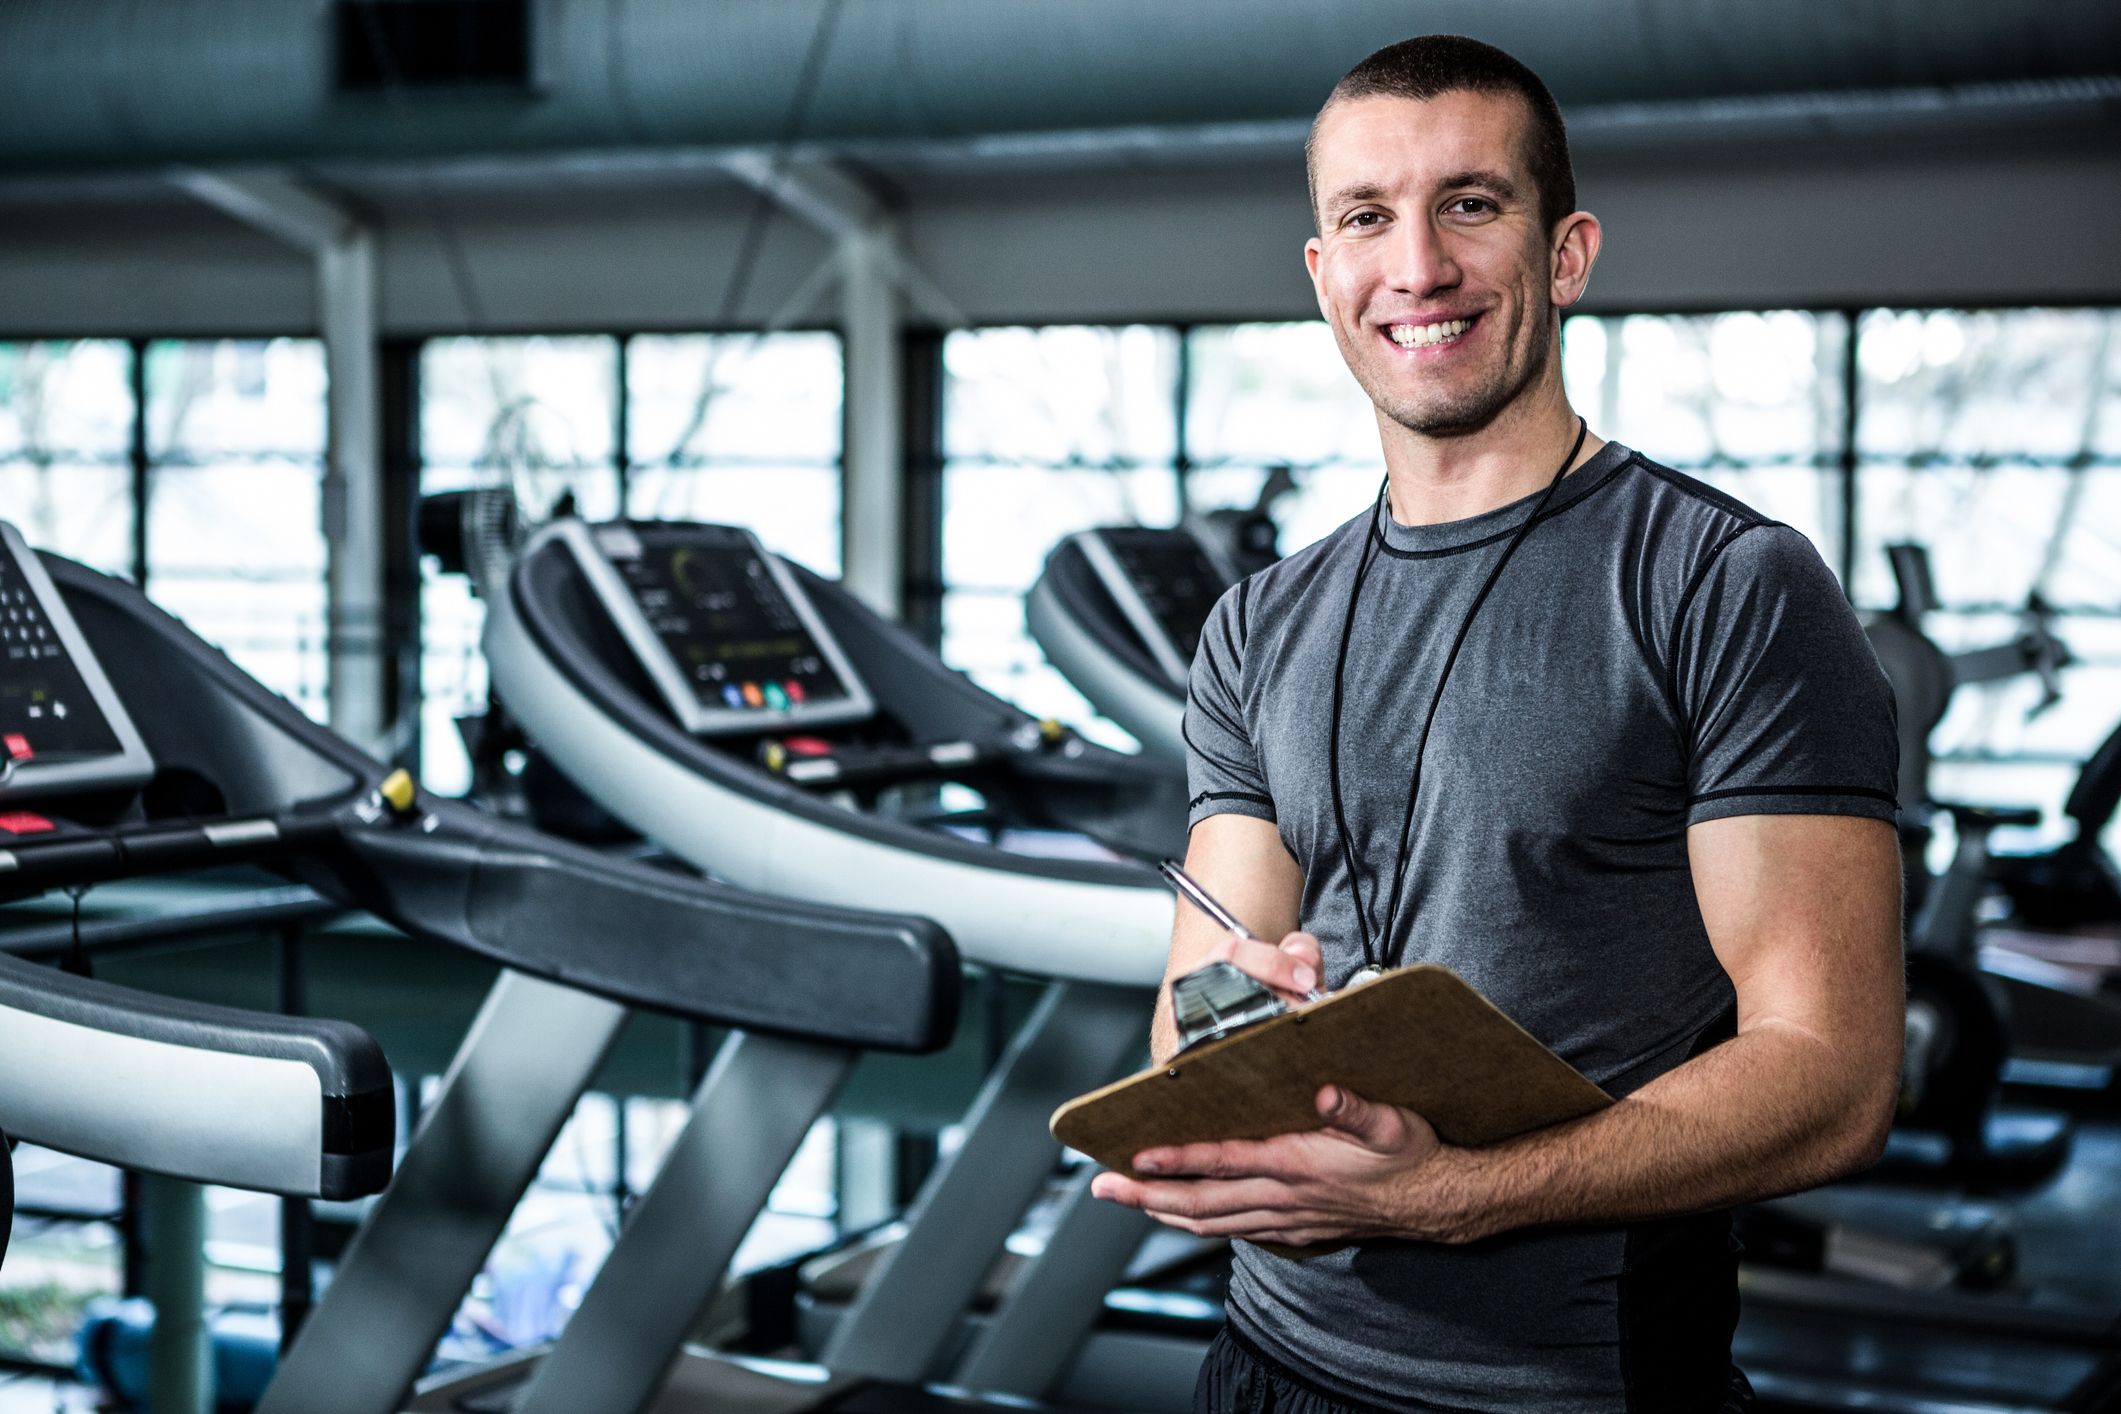 Personal Trainers Share What You Should Know About Fitness